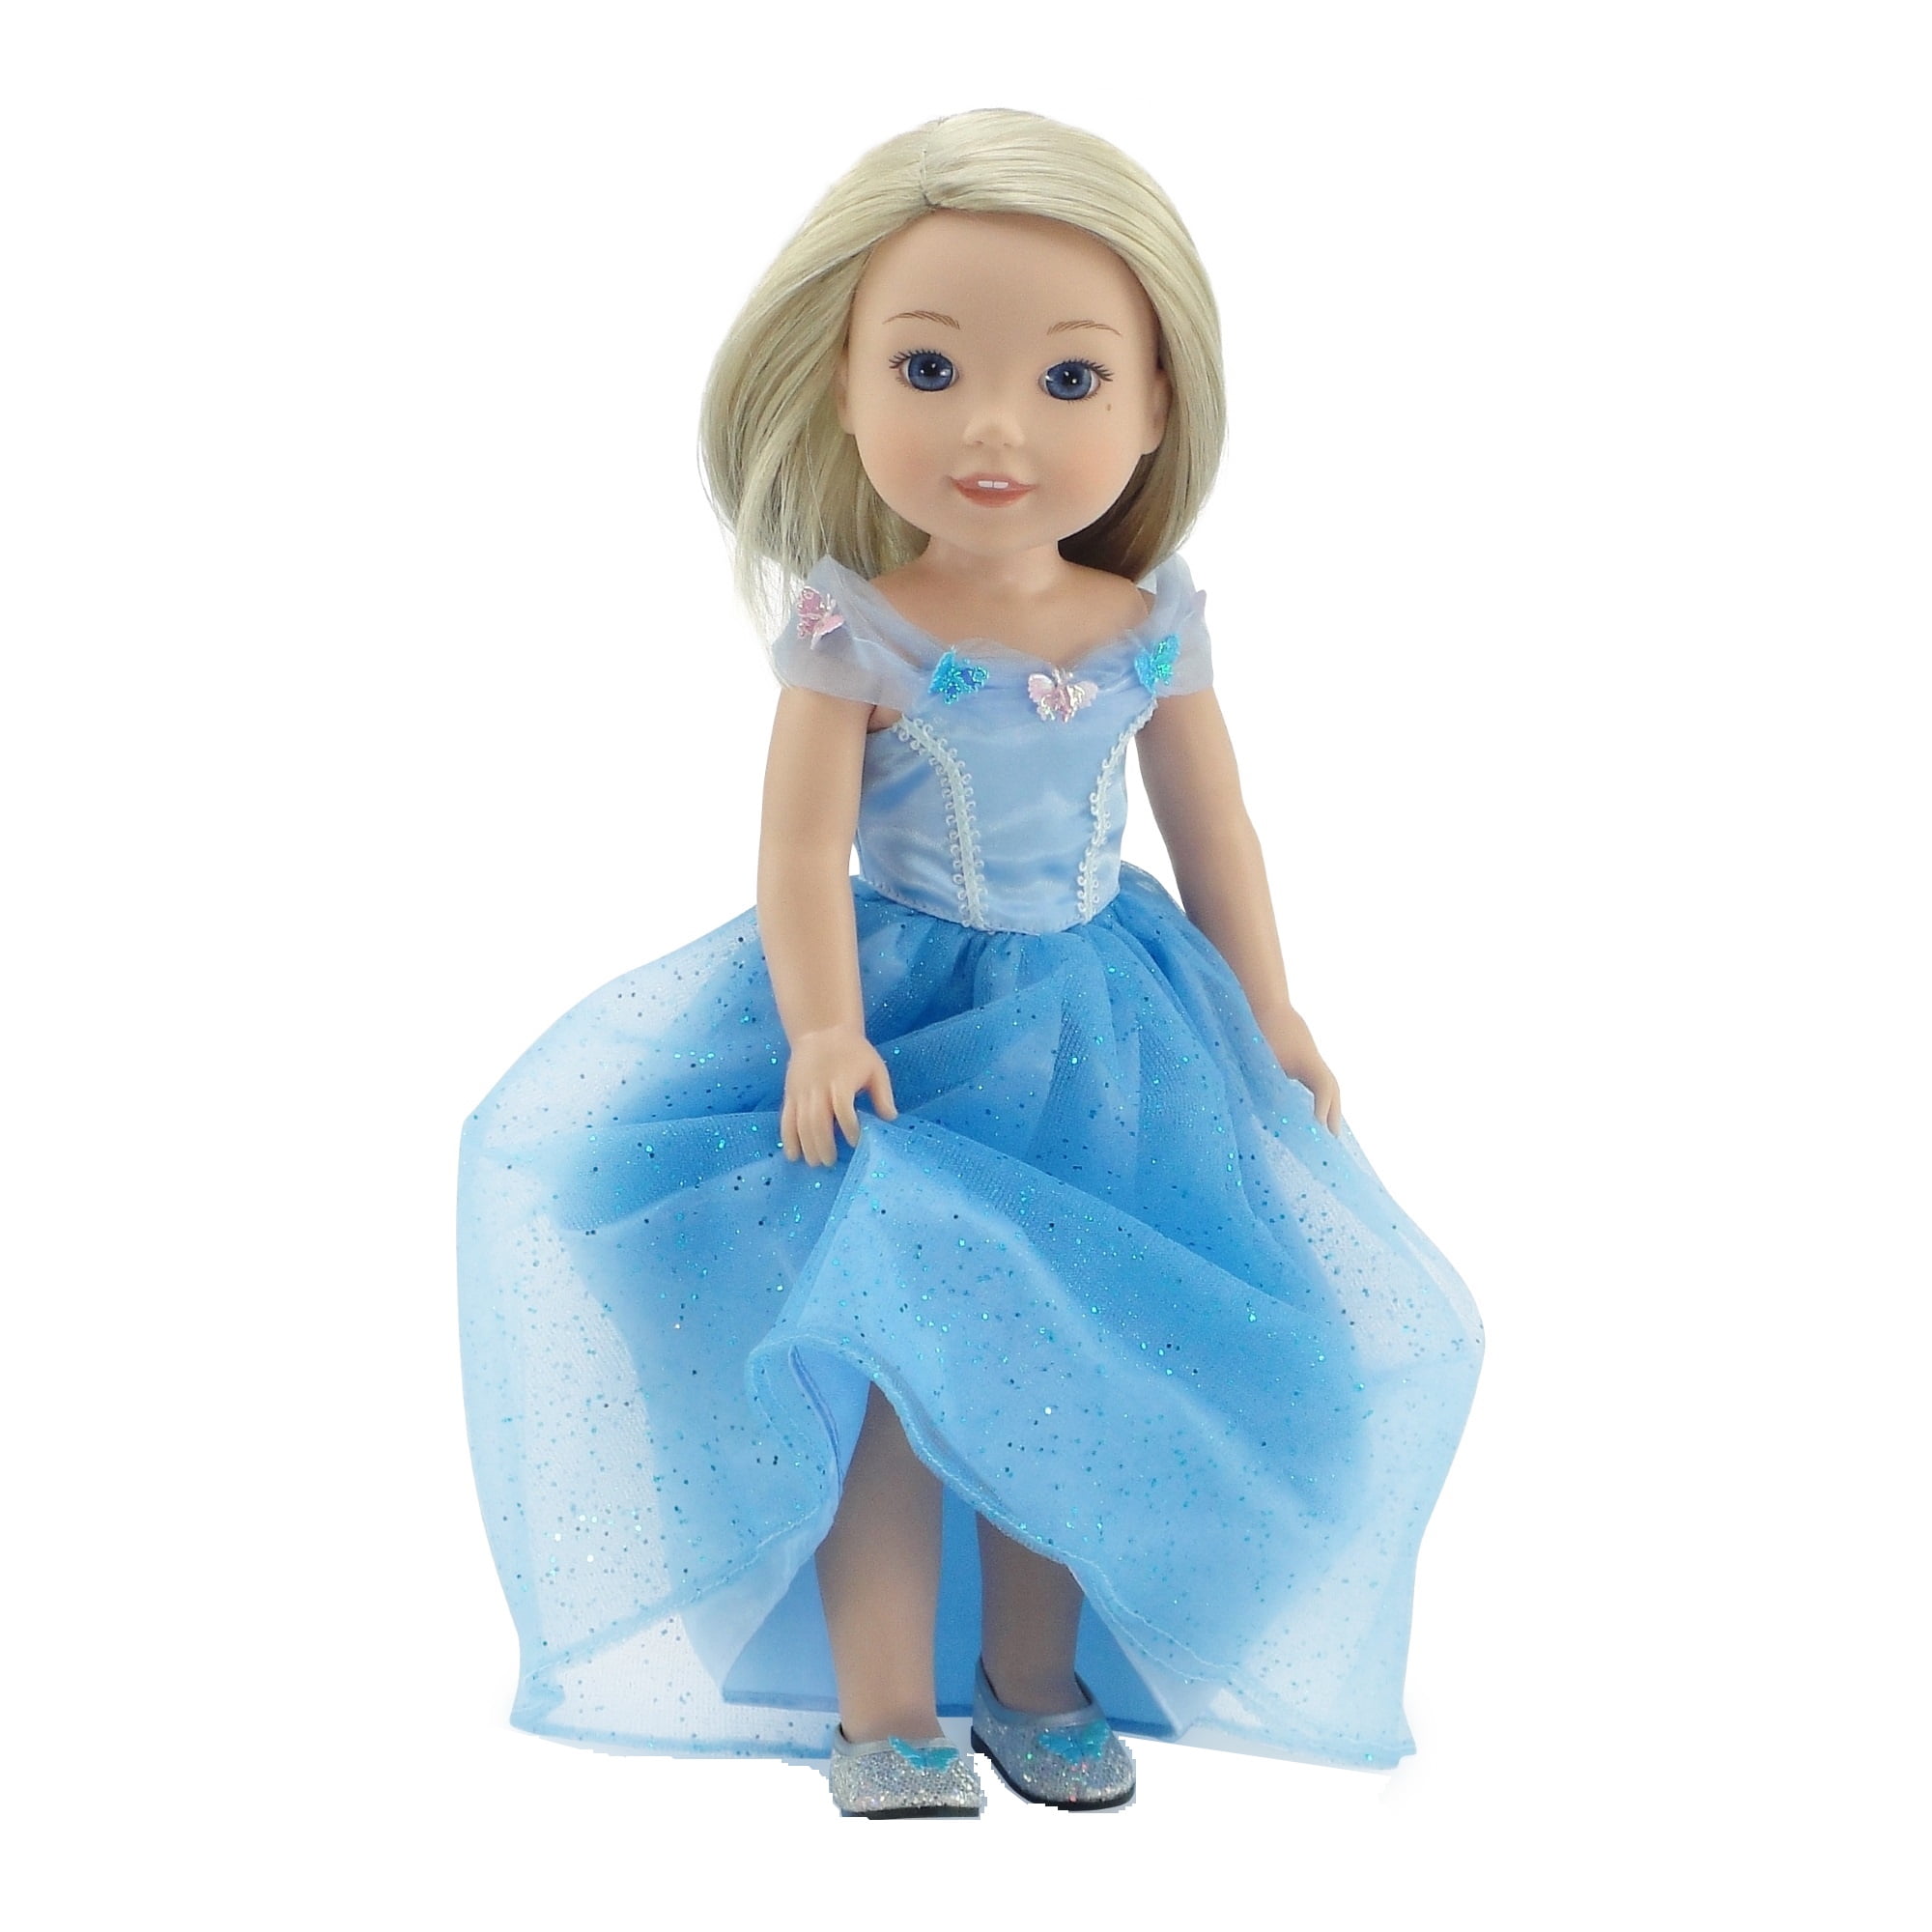 Fashion Princess Party Dress/Evening Clothes/Gown For 11.5 inch Doll a18 